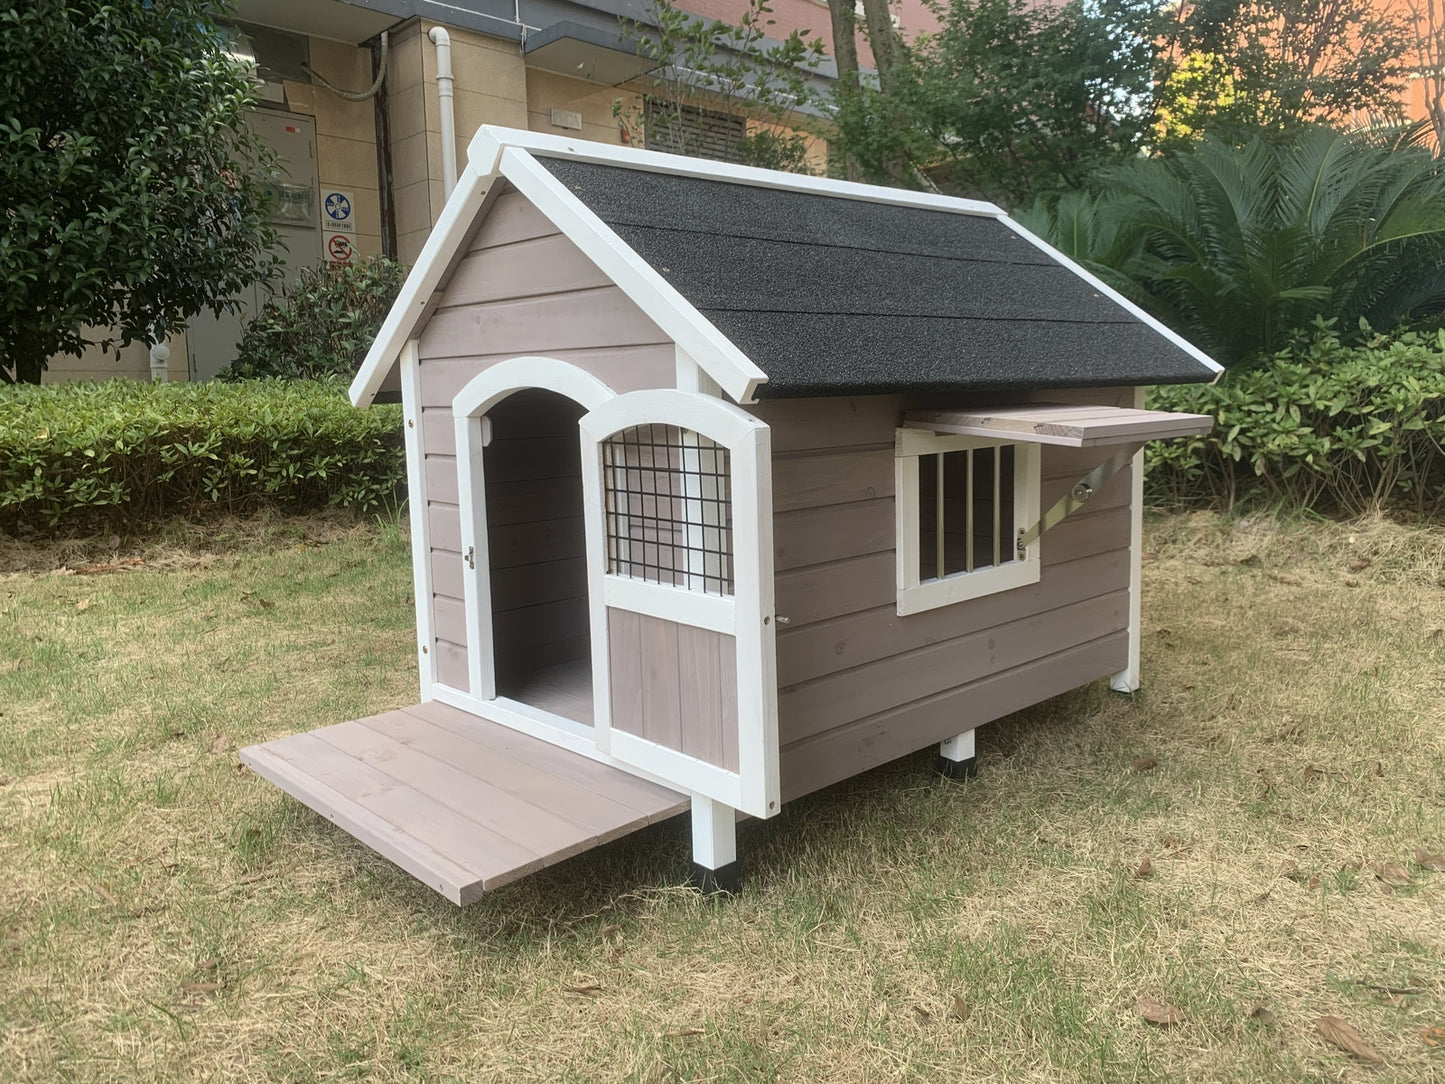 YES4PETS L Timber Pet Dog Kennel House Puppy Wooden Timber Cabin With Stripe Grey